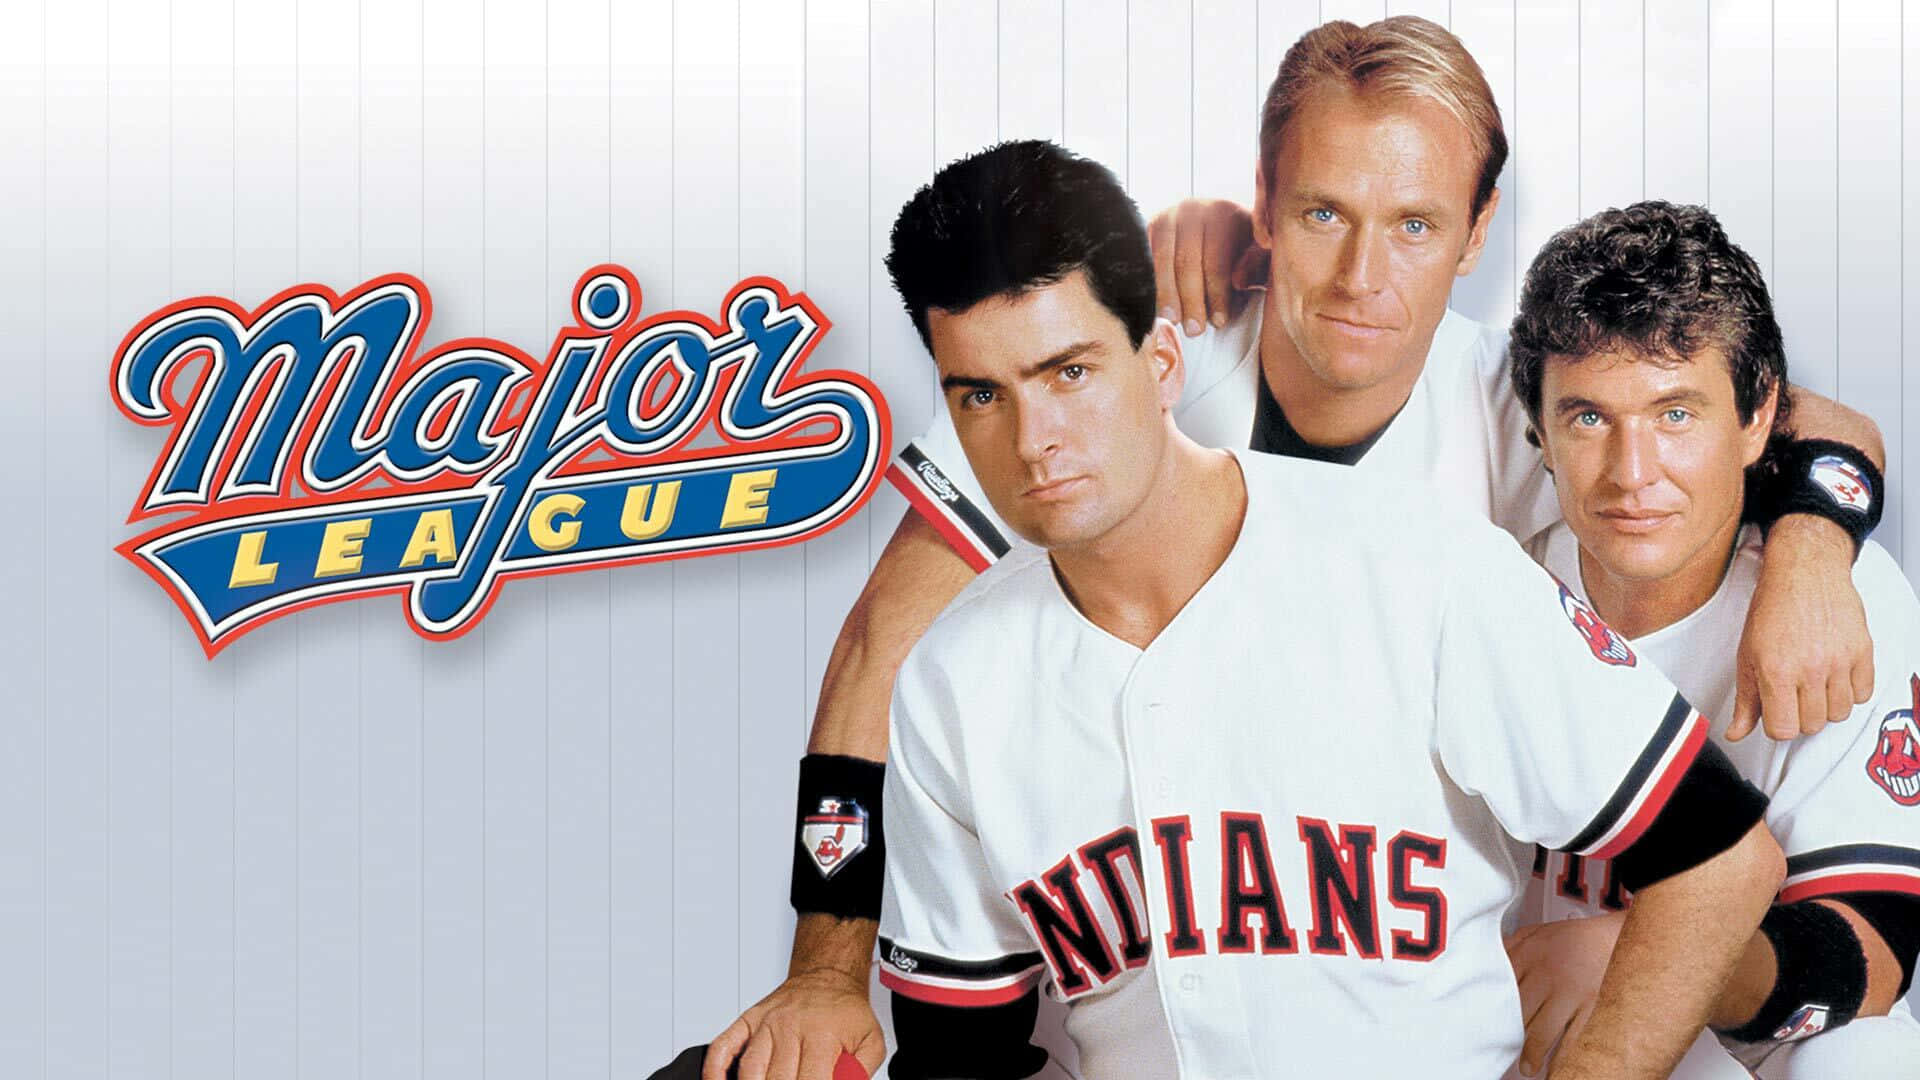 A group photo of the Major League Movie cast during gameplay, wearing their team uniforms on the baseball field. Wallpaper